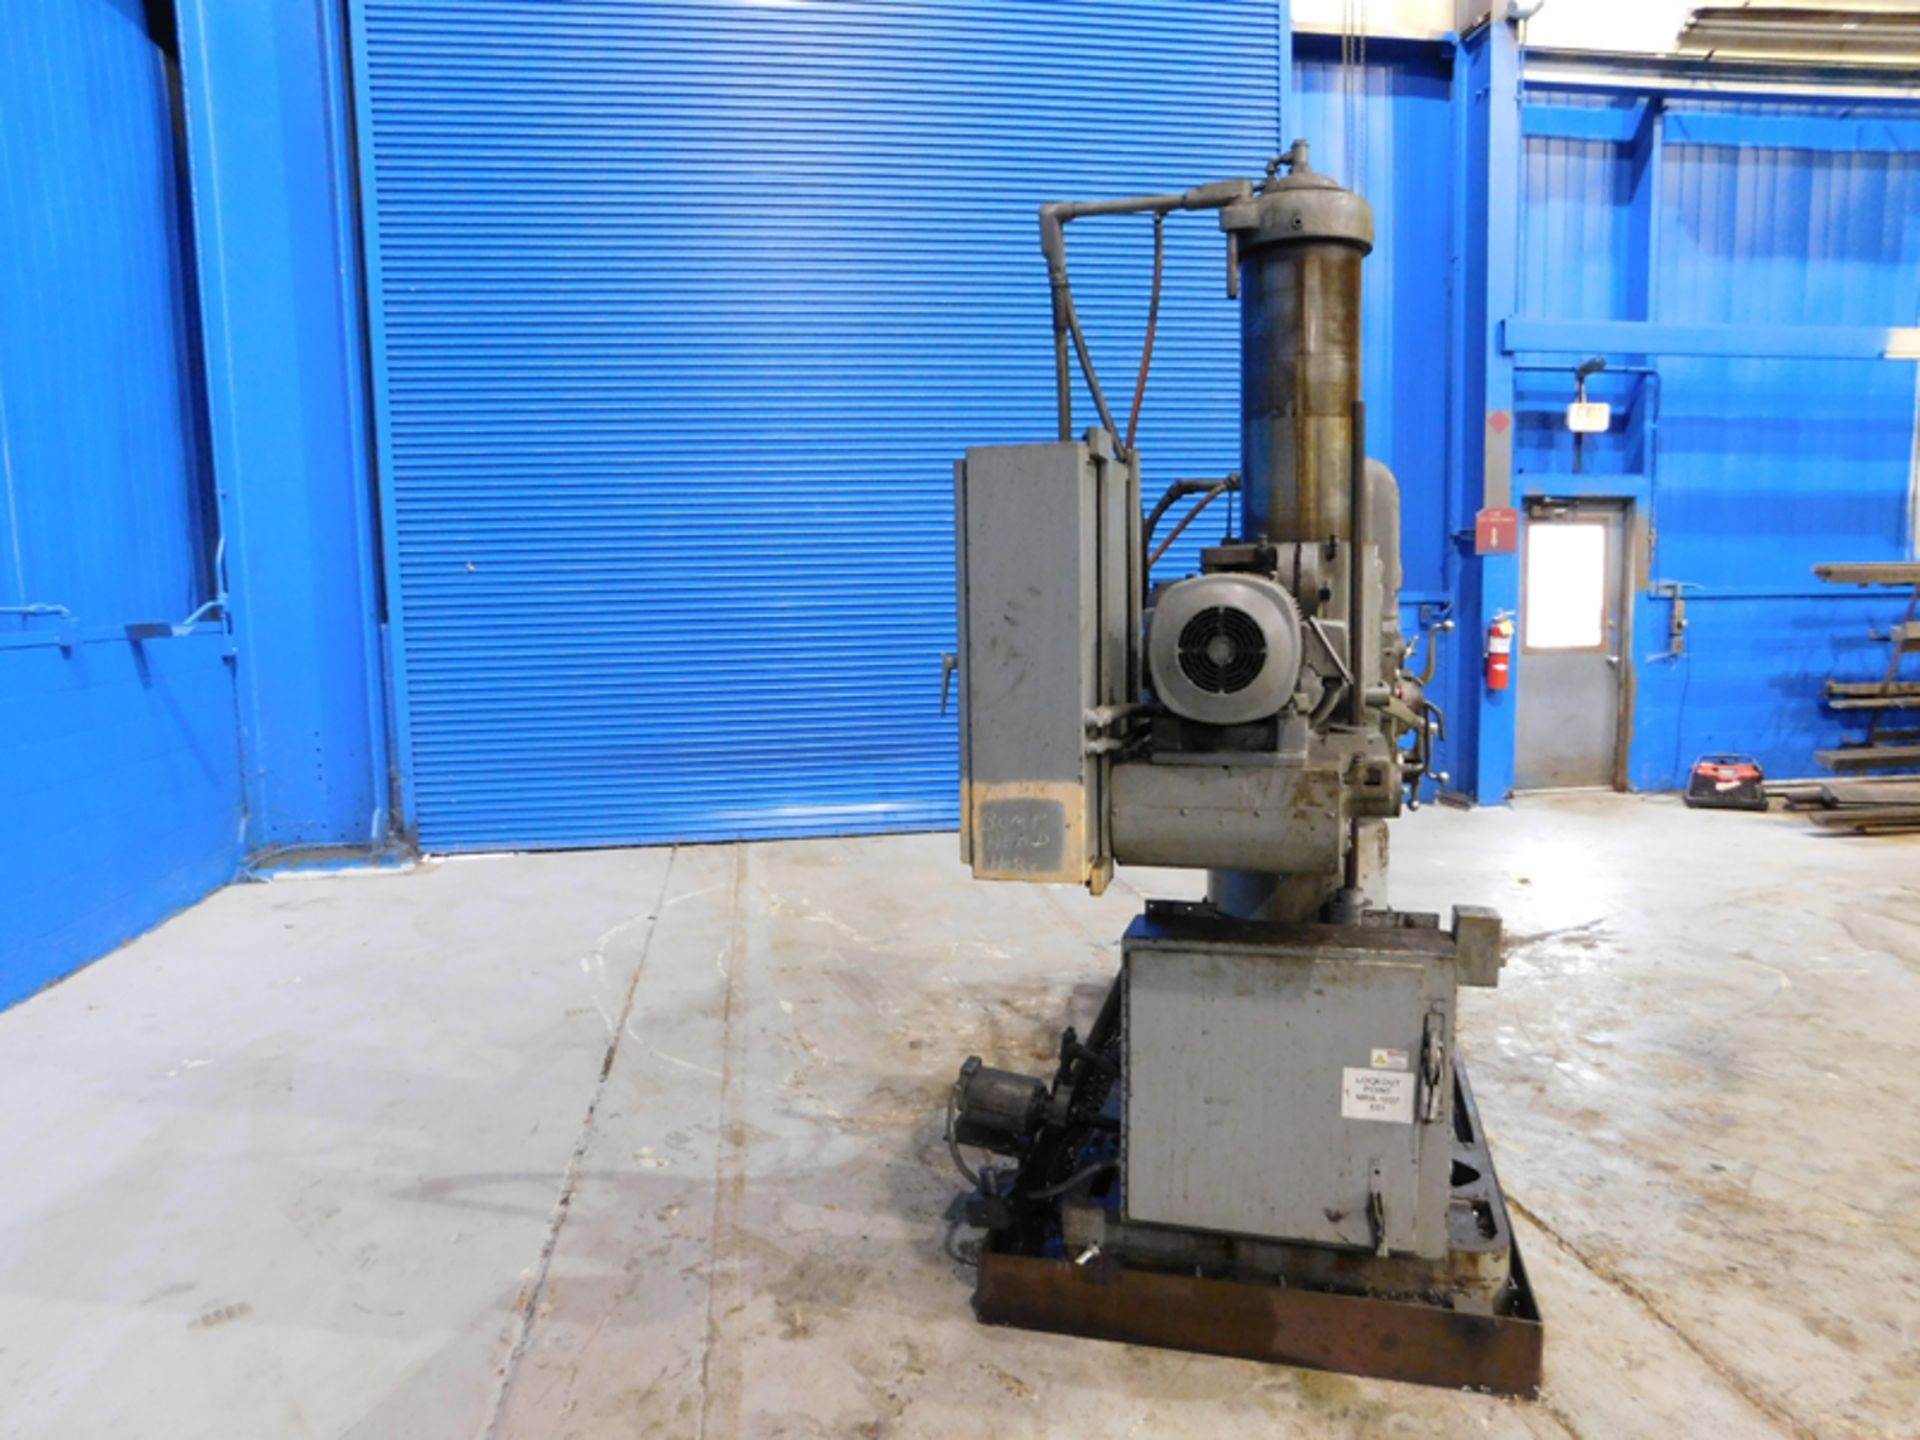 Carlton Radial Arm Drill | 4' x 9", Mdl: 1A, S/N: 4308, Located In: Painesville, OH - Image 5 of 9